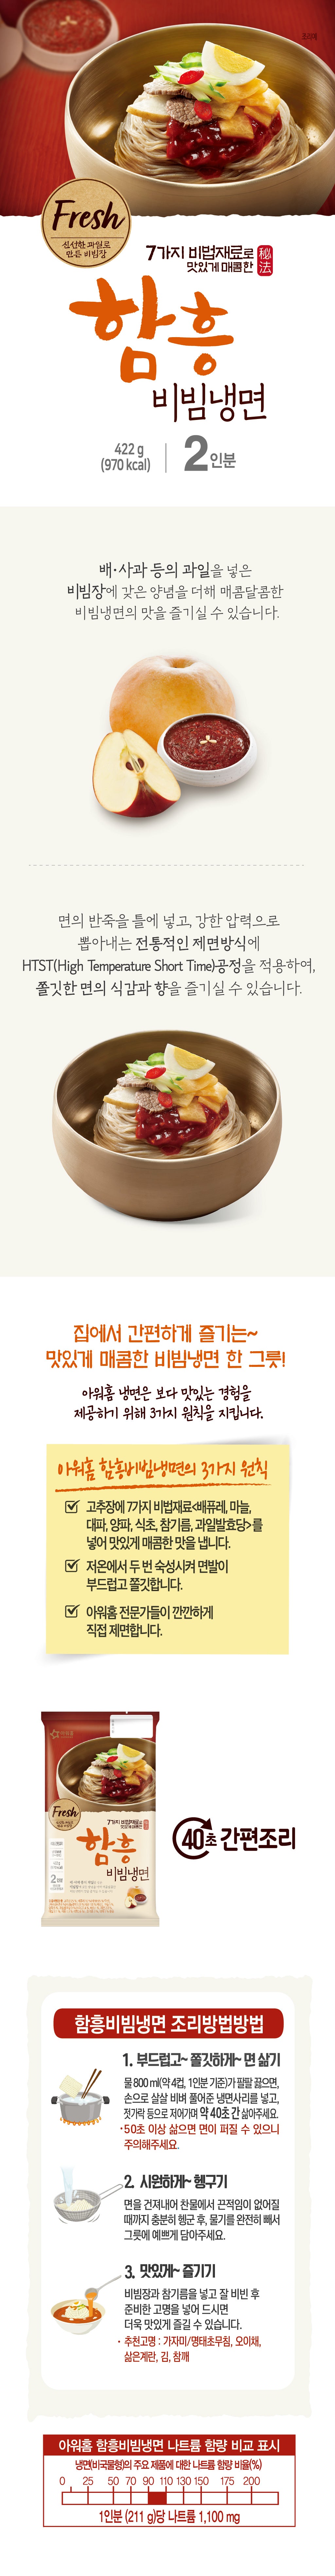 50% SALE💙 아워홈 함흥 비빔 냉면 OUR SPICY COLD NODDLE